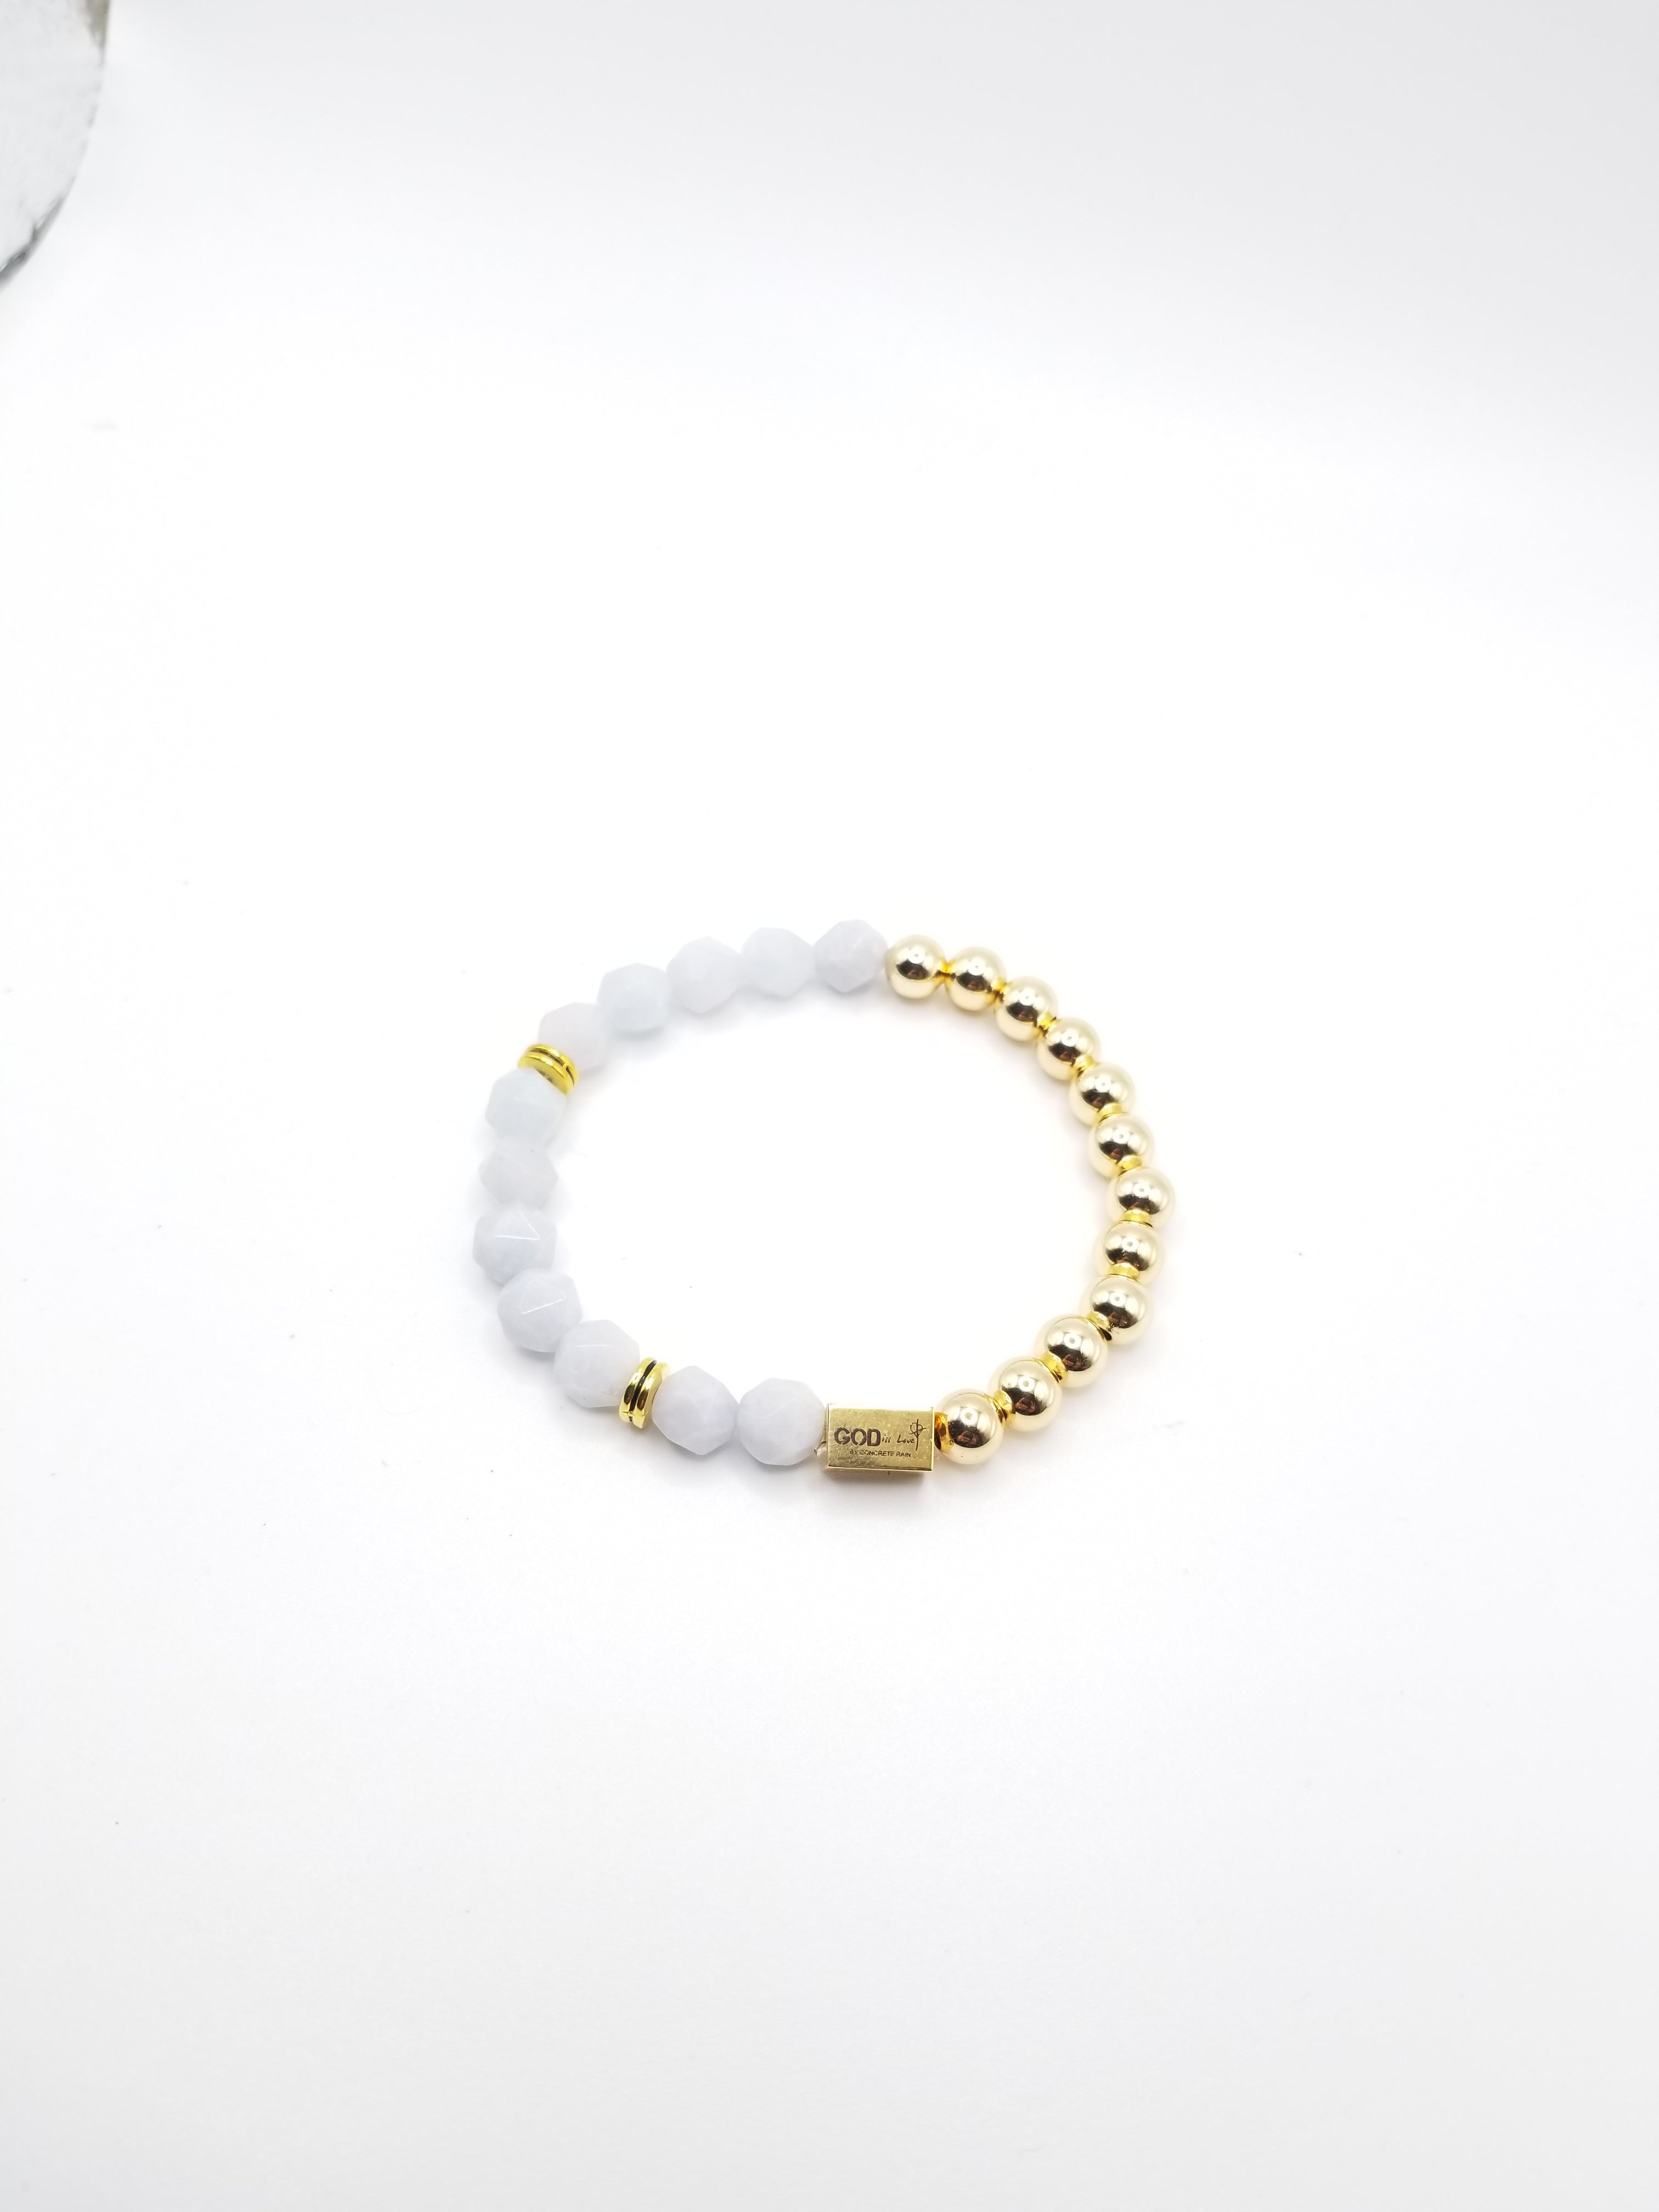 Aquamarine Faceted Agate and Gold-filled Beaded Bracelet